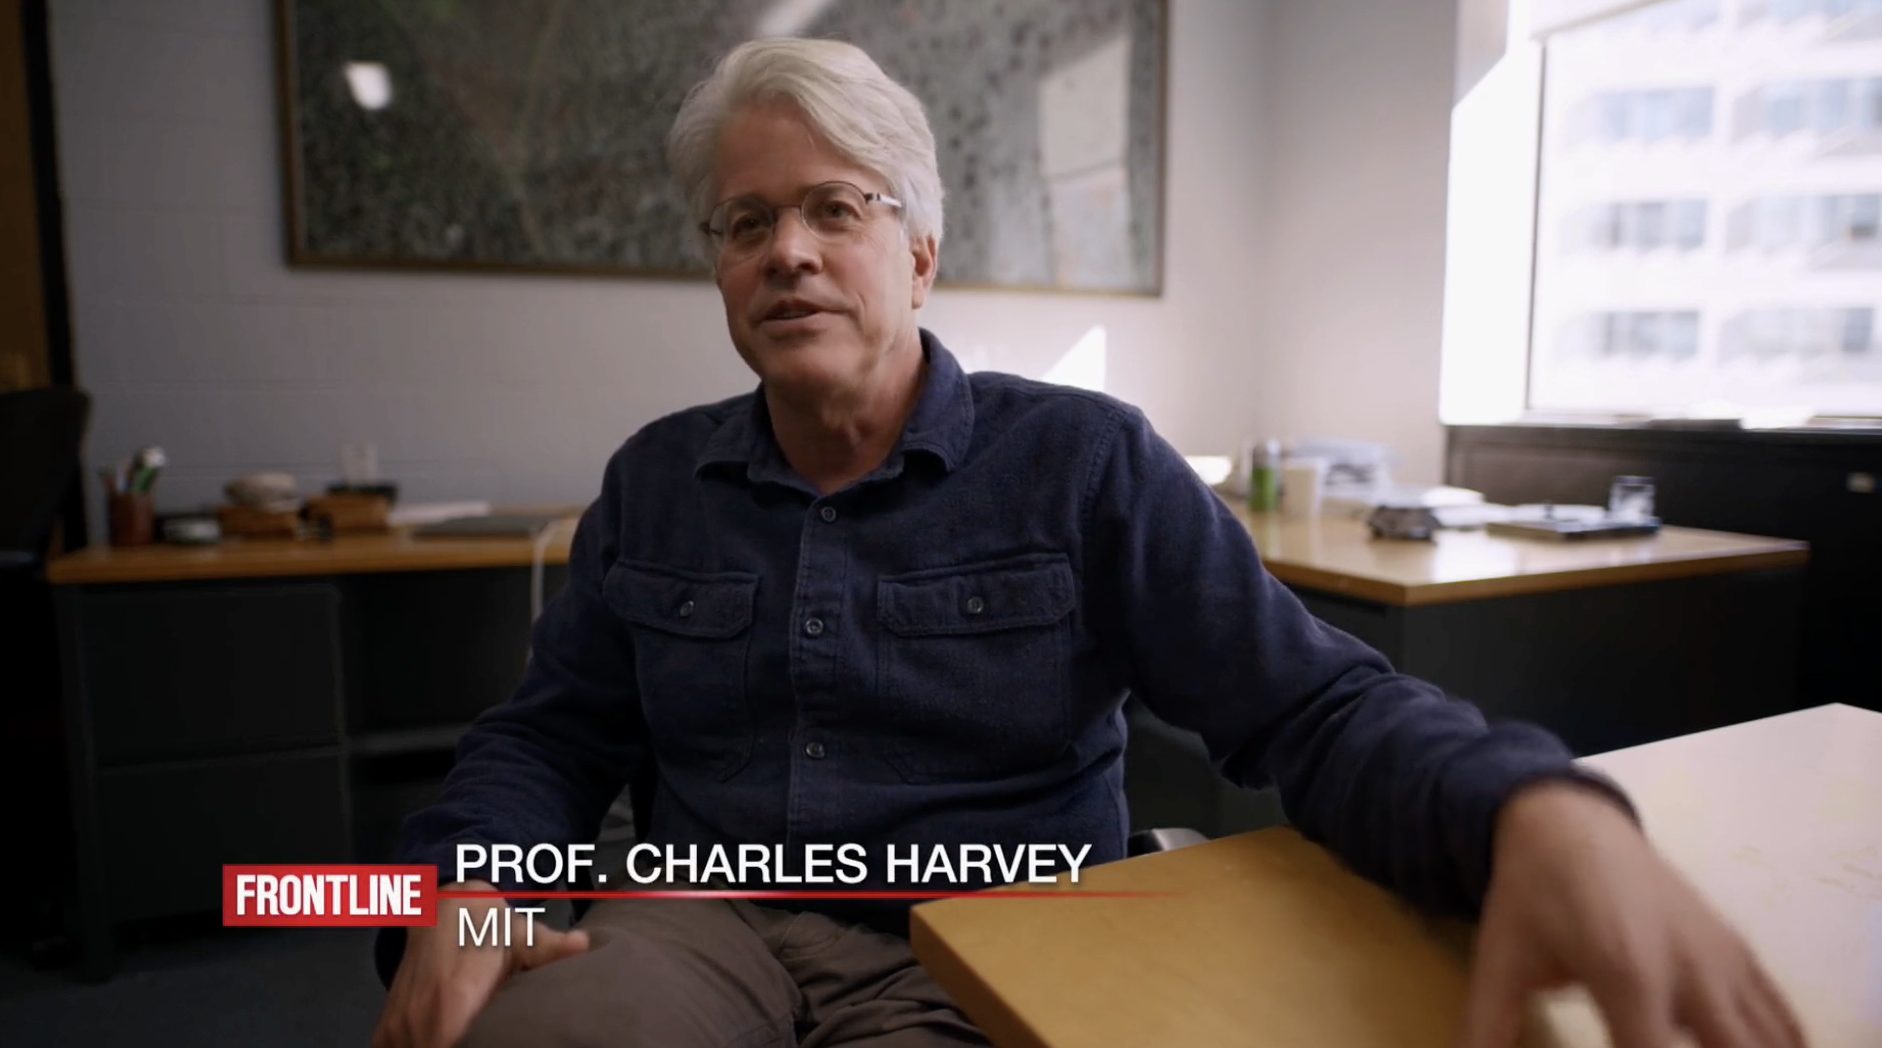 Prof. Charles Harvey featured in “The Power of Big Oil” documentary